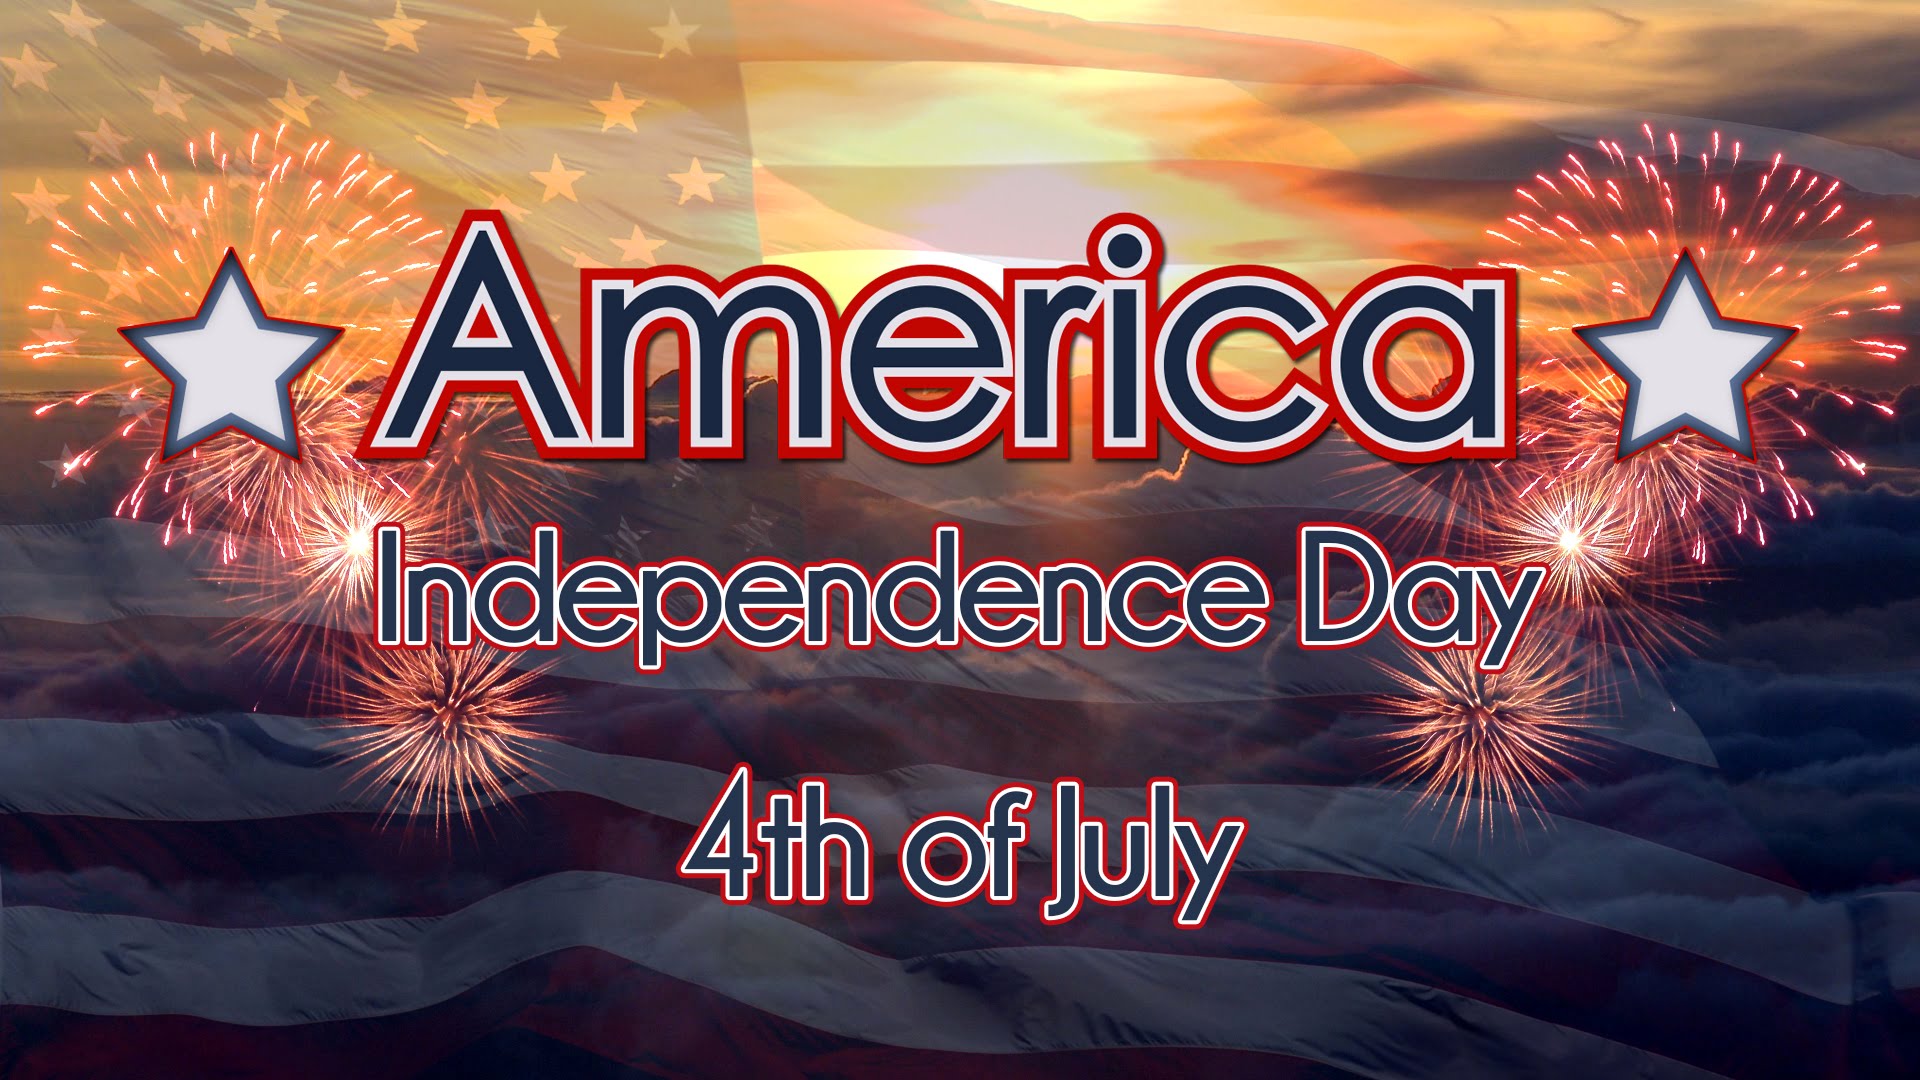 4th July Wishes Greeting Free Desktop Mobile Background Hd Wallpaper